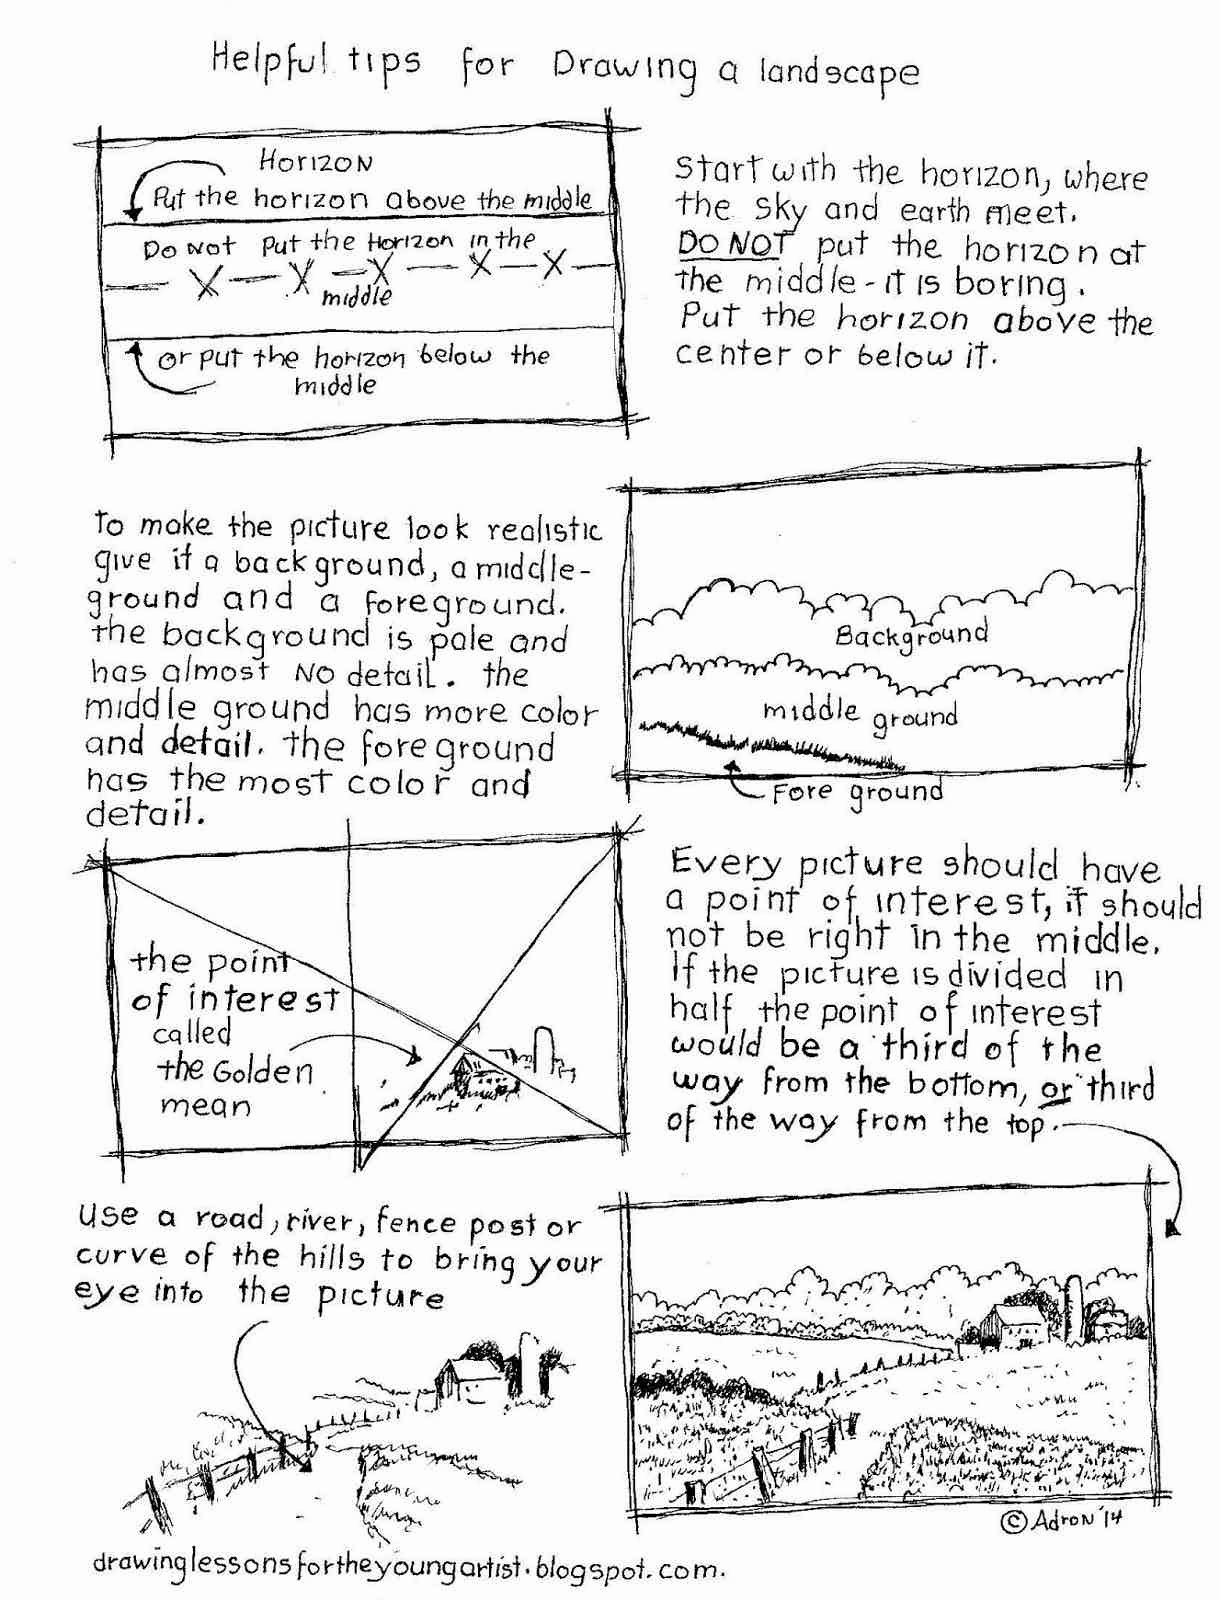 Drawing Conclusions Worksheets 4th Grade Unique 20 Drawing Conclusions Worksheets 4th Grade